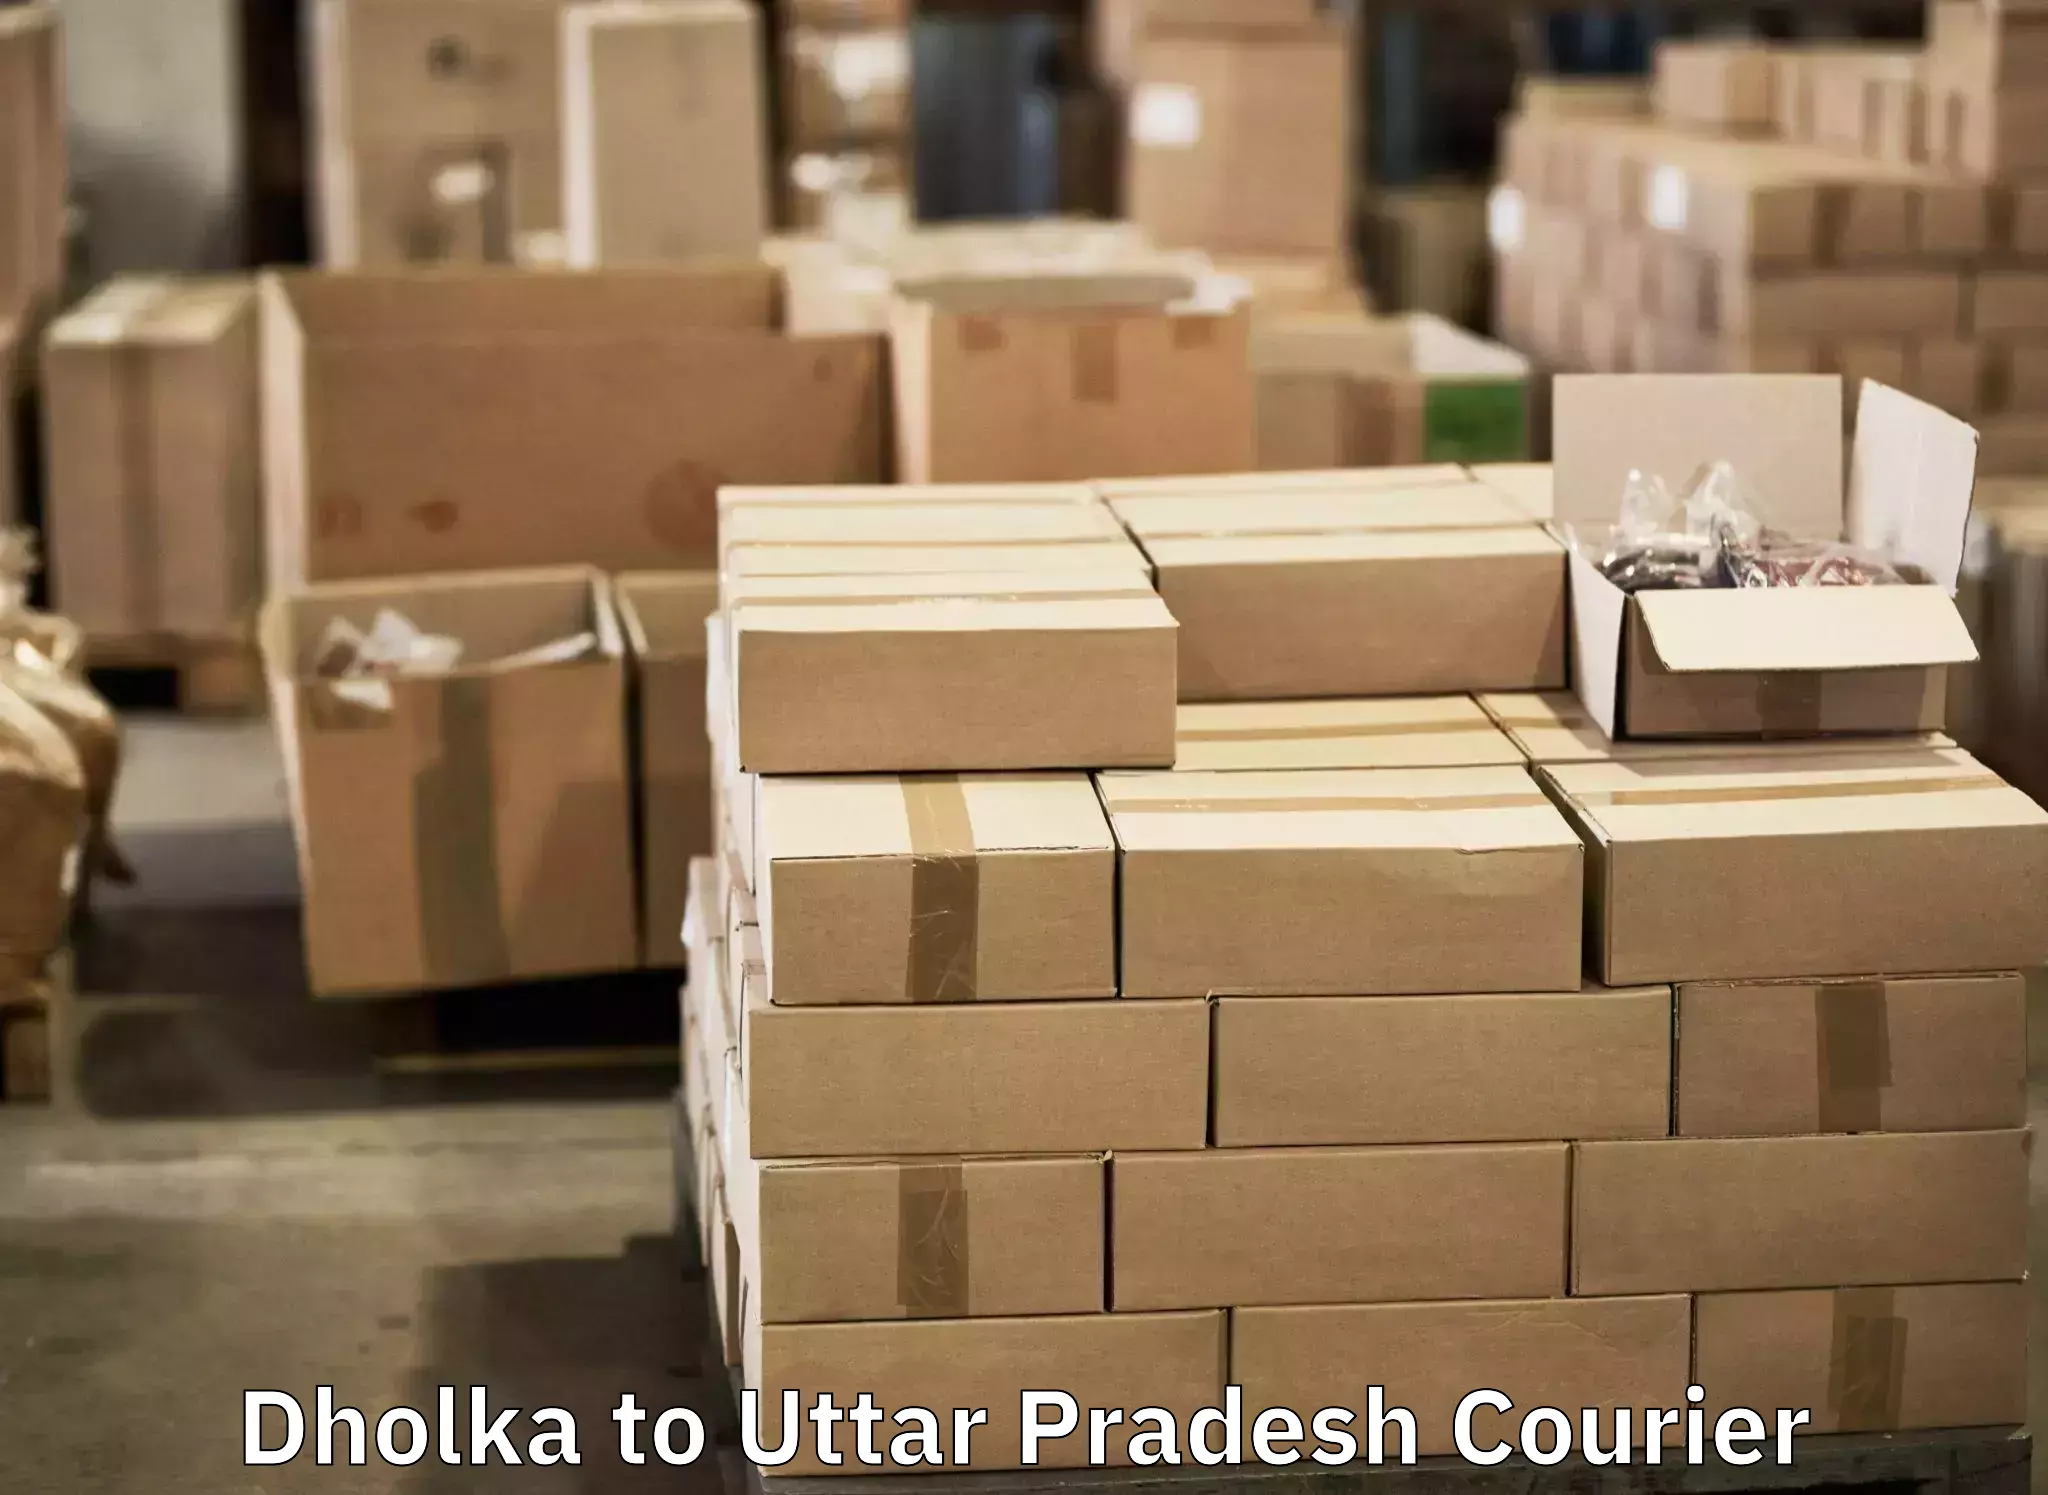 Luggage shipment specialists Dholka to Dhaurahara